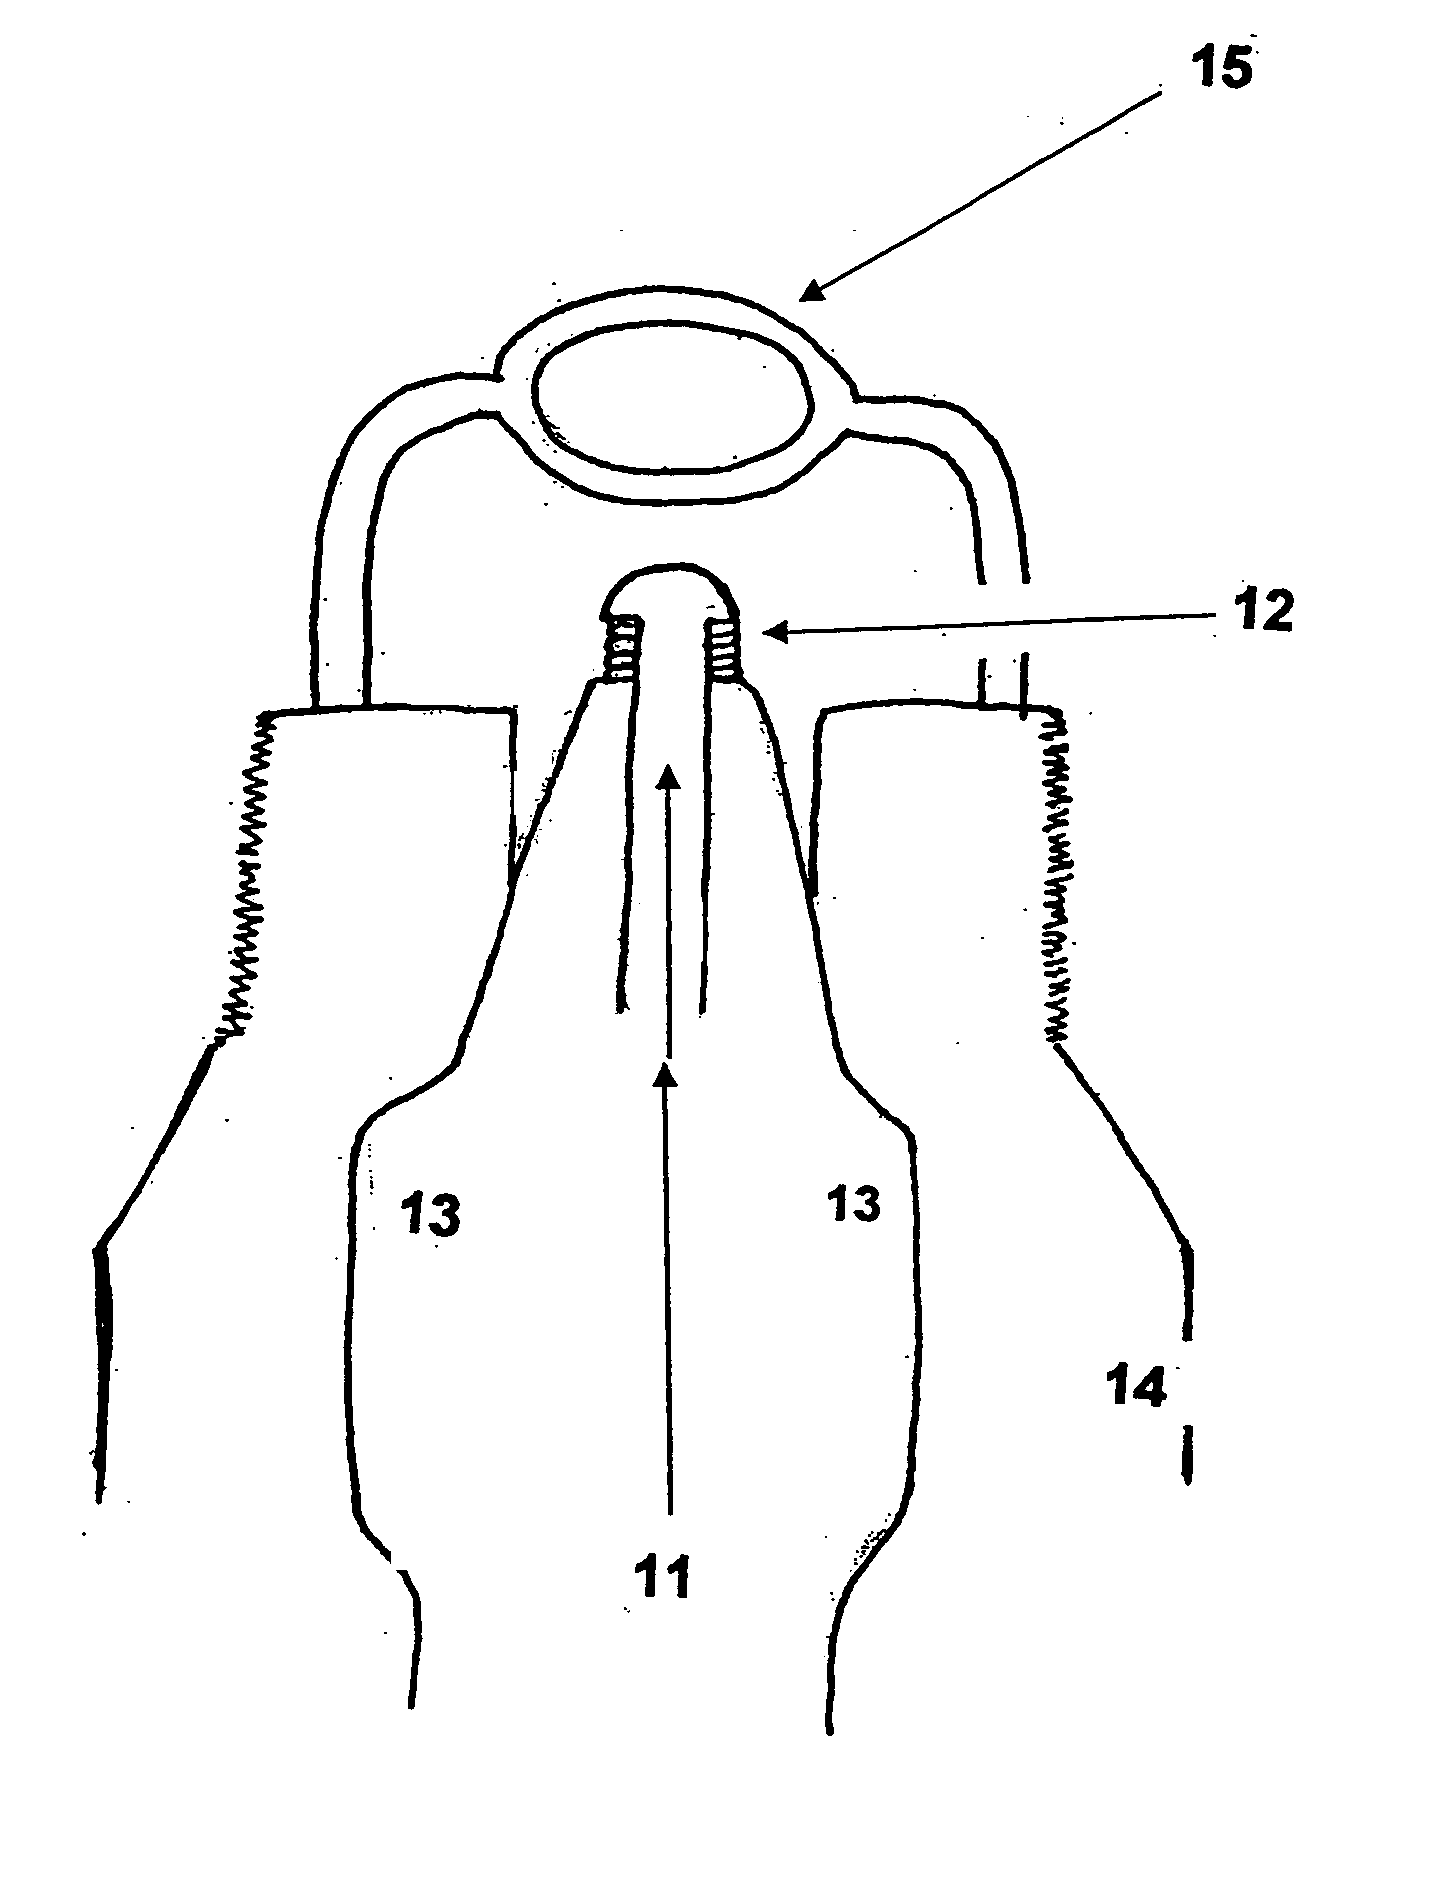 Higher-performance spark plug and ramrod engine ignition system using piezo-electric enhancement components